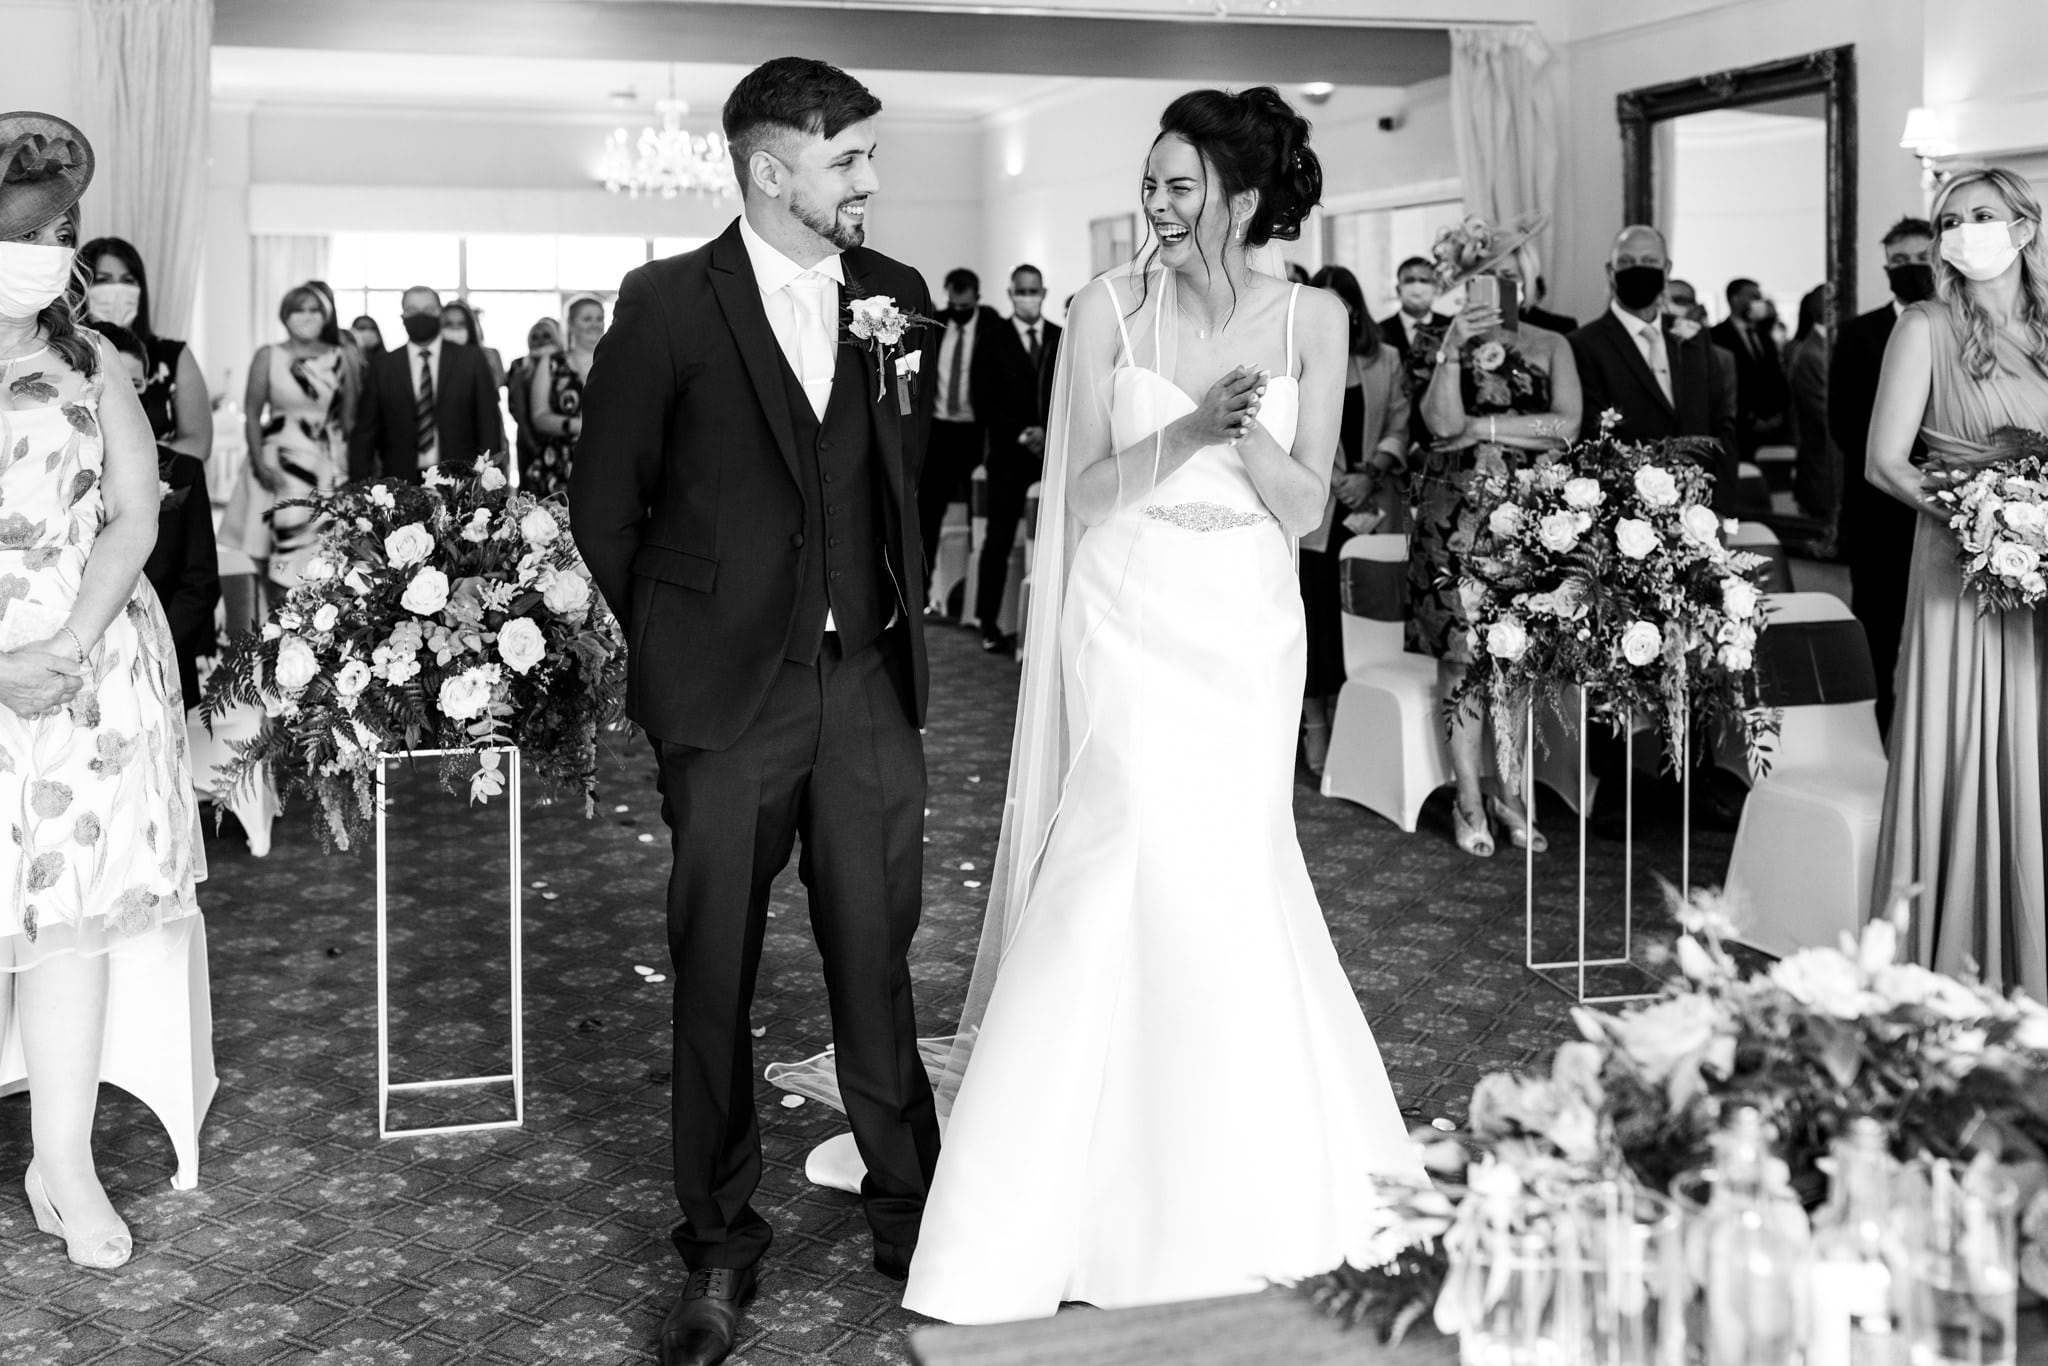 Peterstone Court Wedding Ceremony - Art by Design Photography